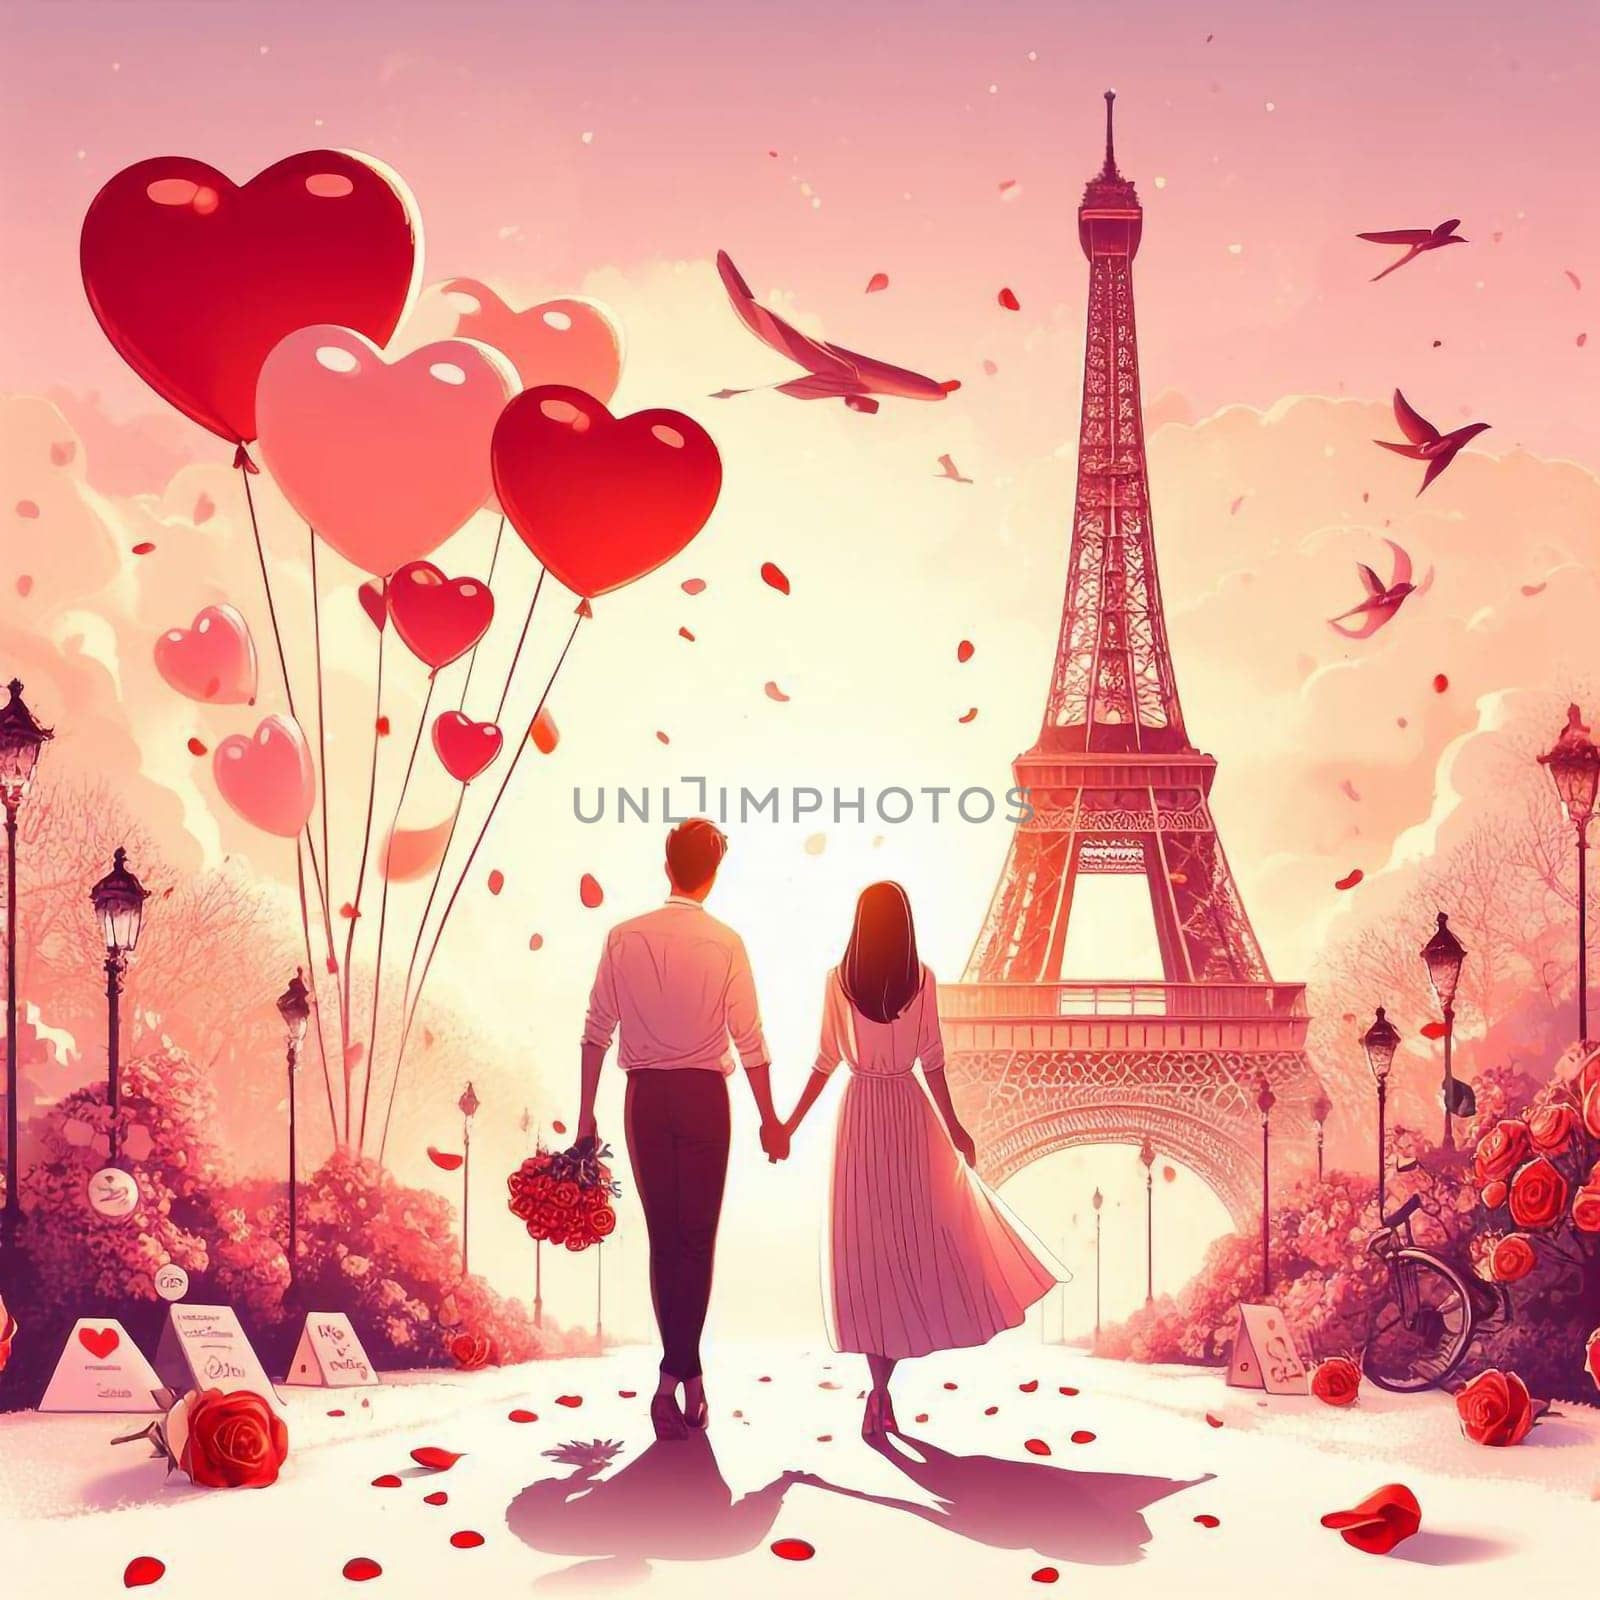 Valentine's day for lovers illustration by architectphd